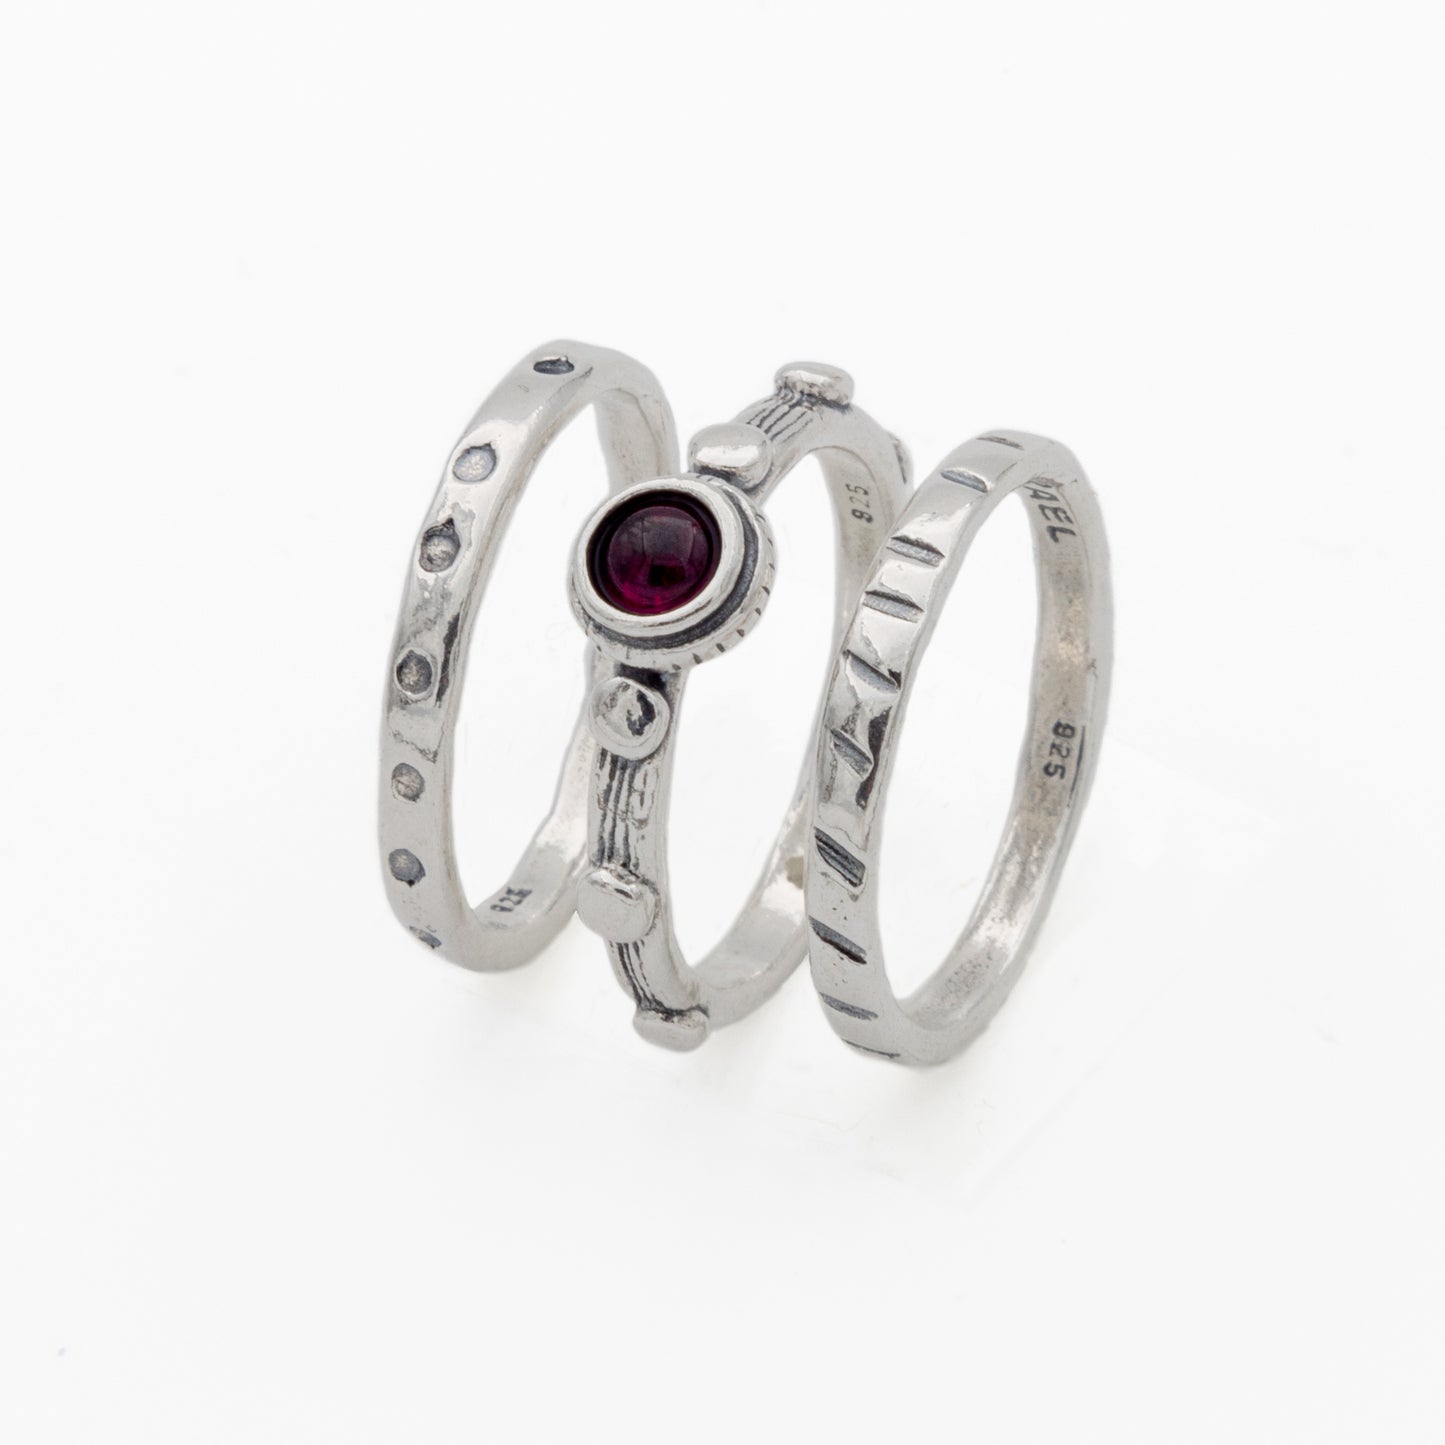 Set of 3 Silver Rings with Garnet 01R598GR